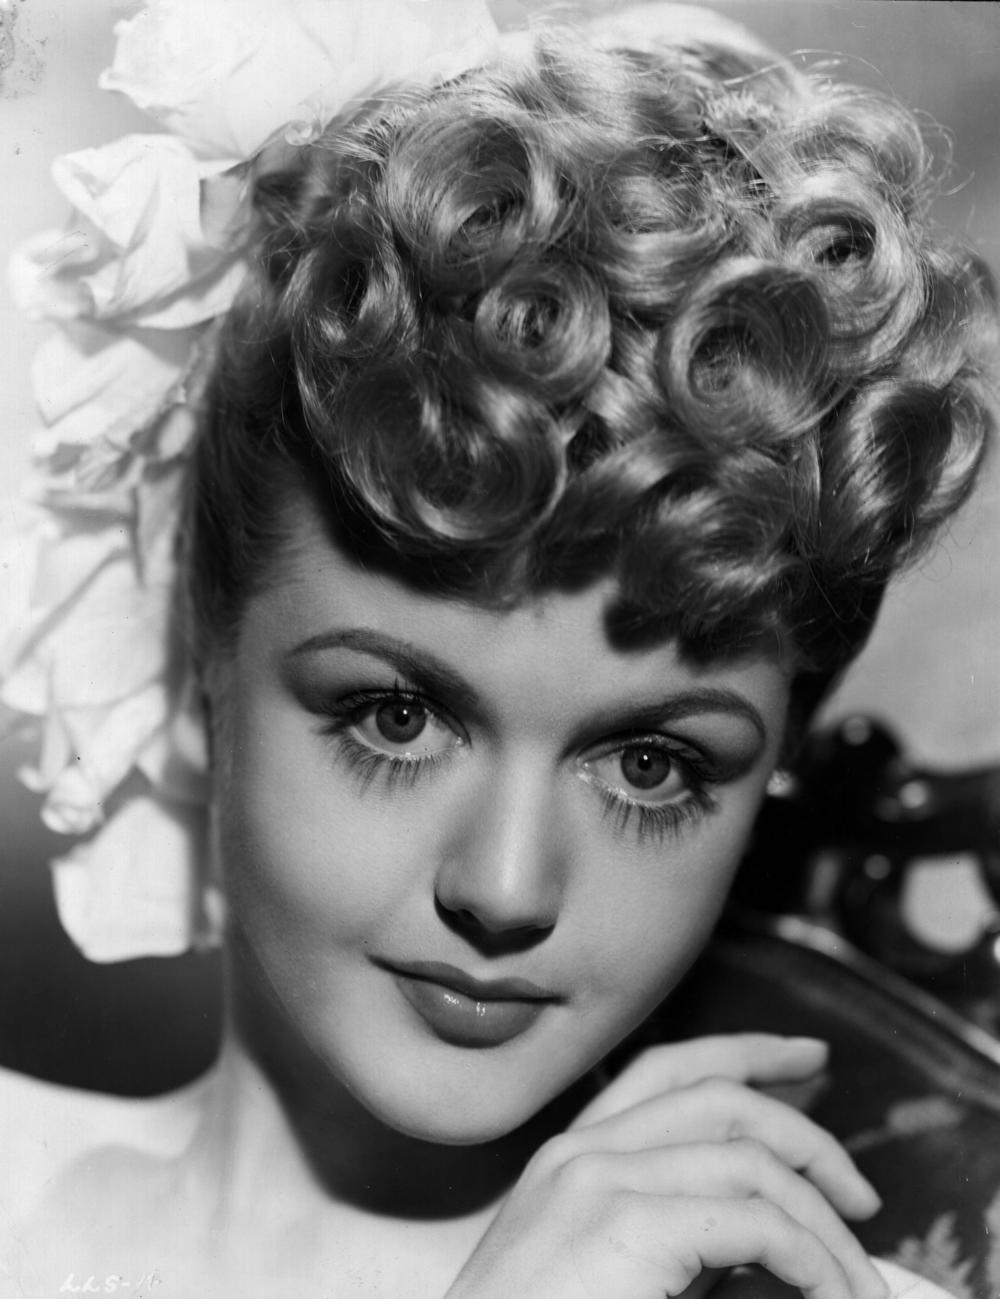 Lansbury was born in London in 1925. She and her mother moved to the U.S. in 1940, and settled in Hollywood two years later.